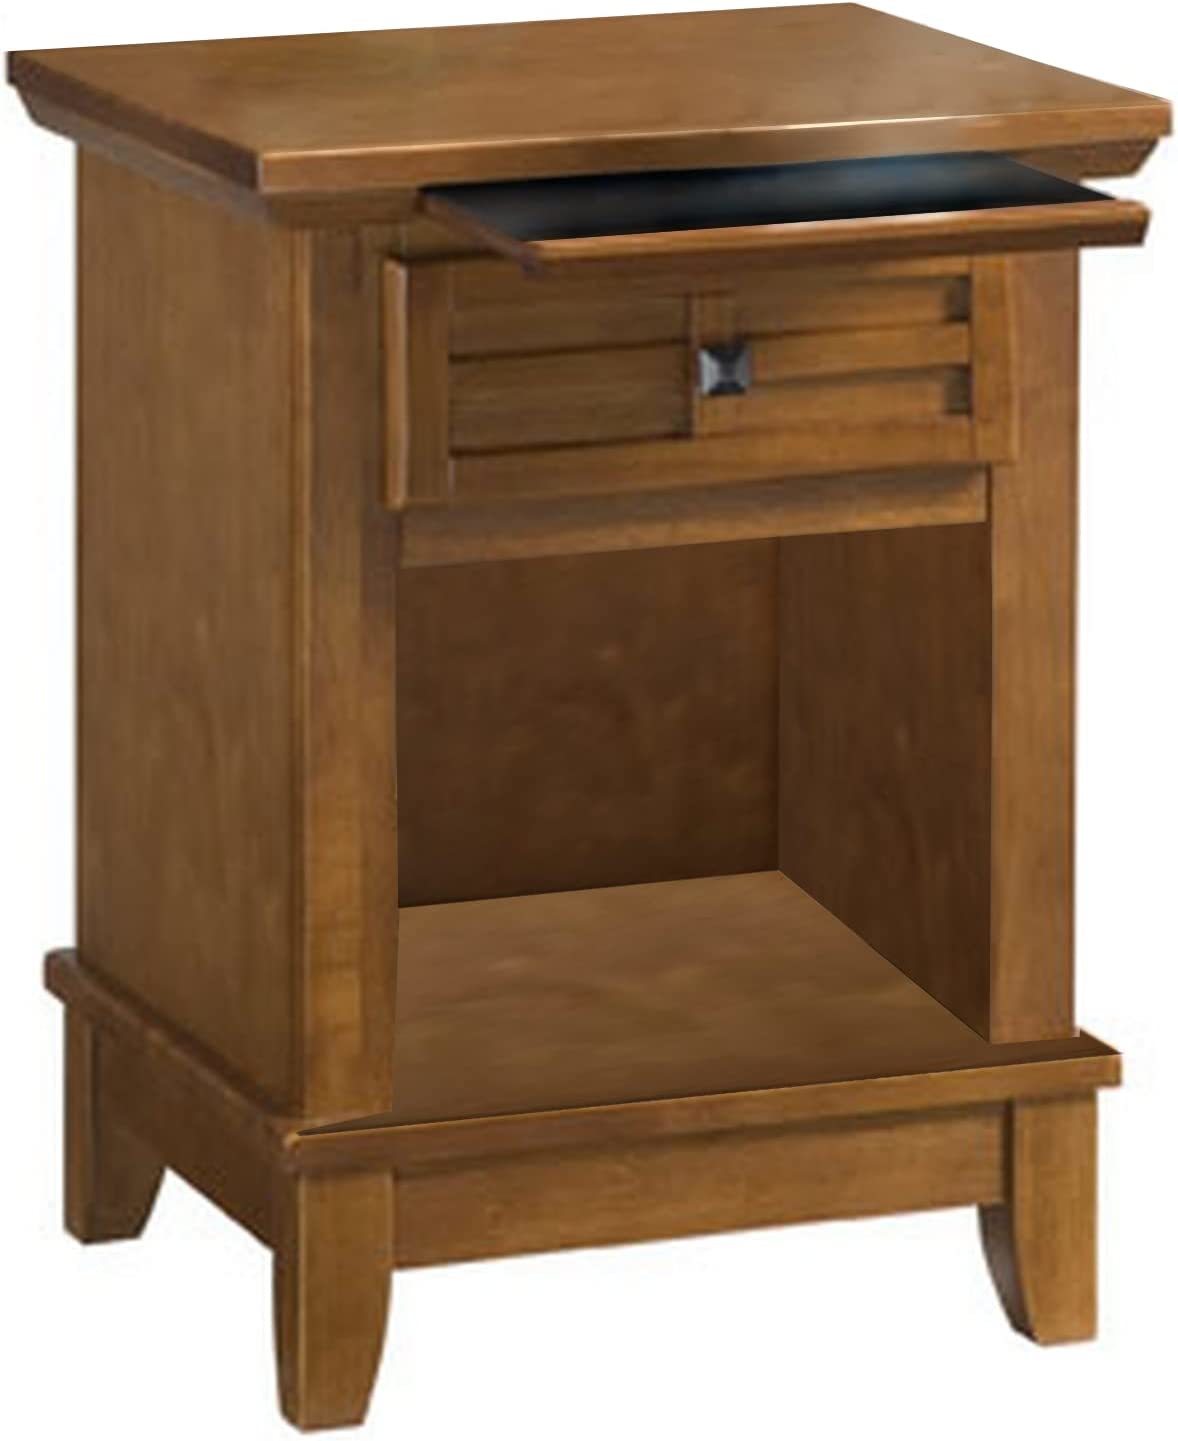 Arts & Crafts Cottage Oak Night Stand By Home Styles - $159.99